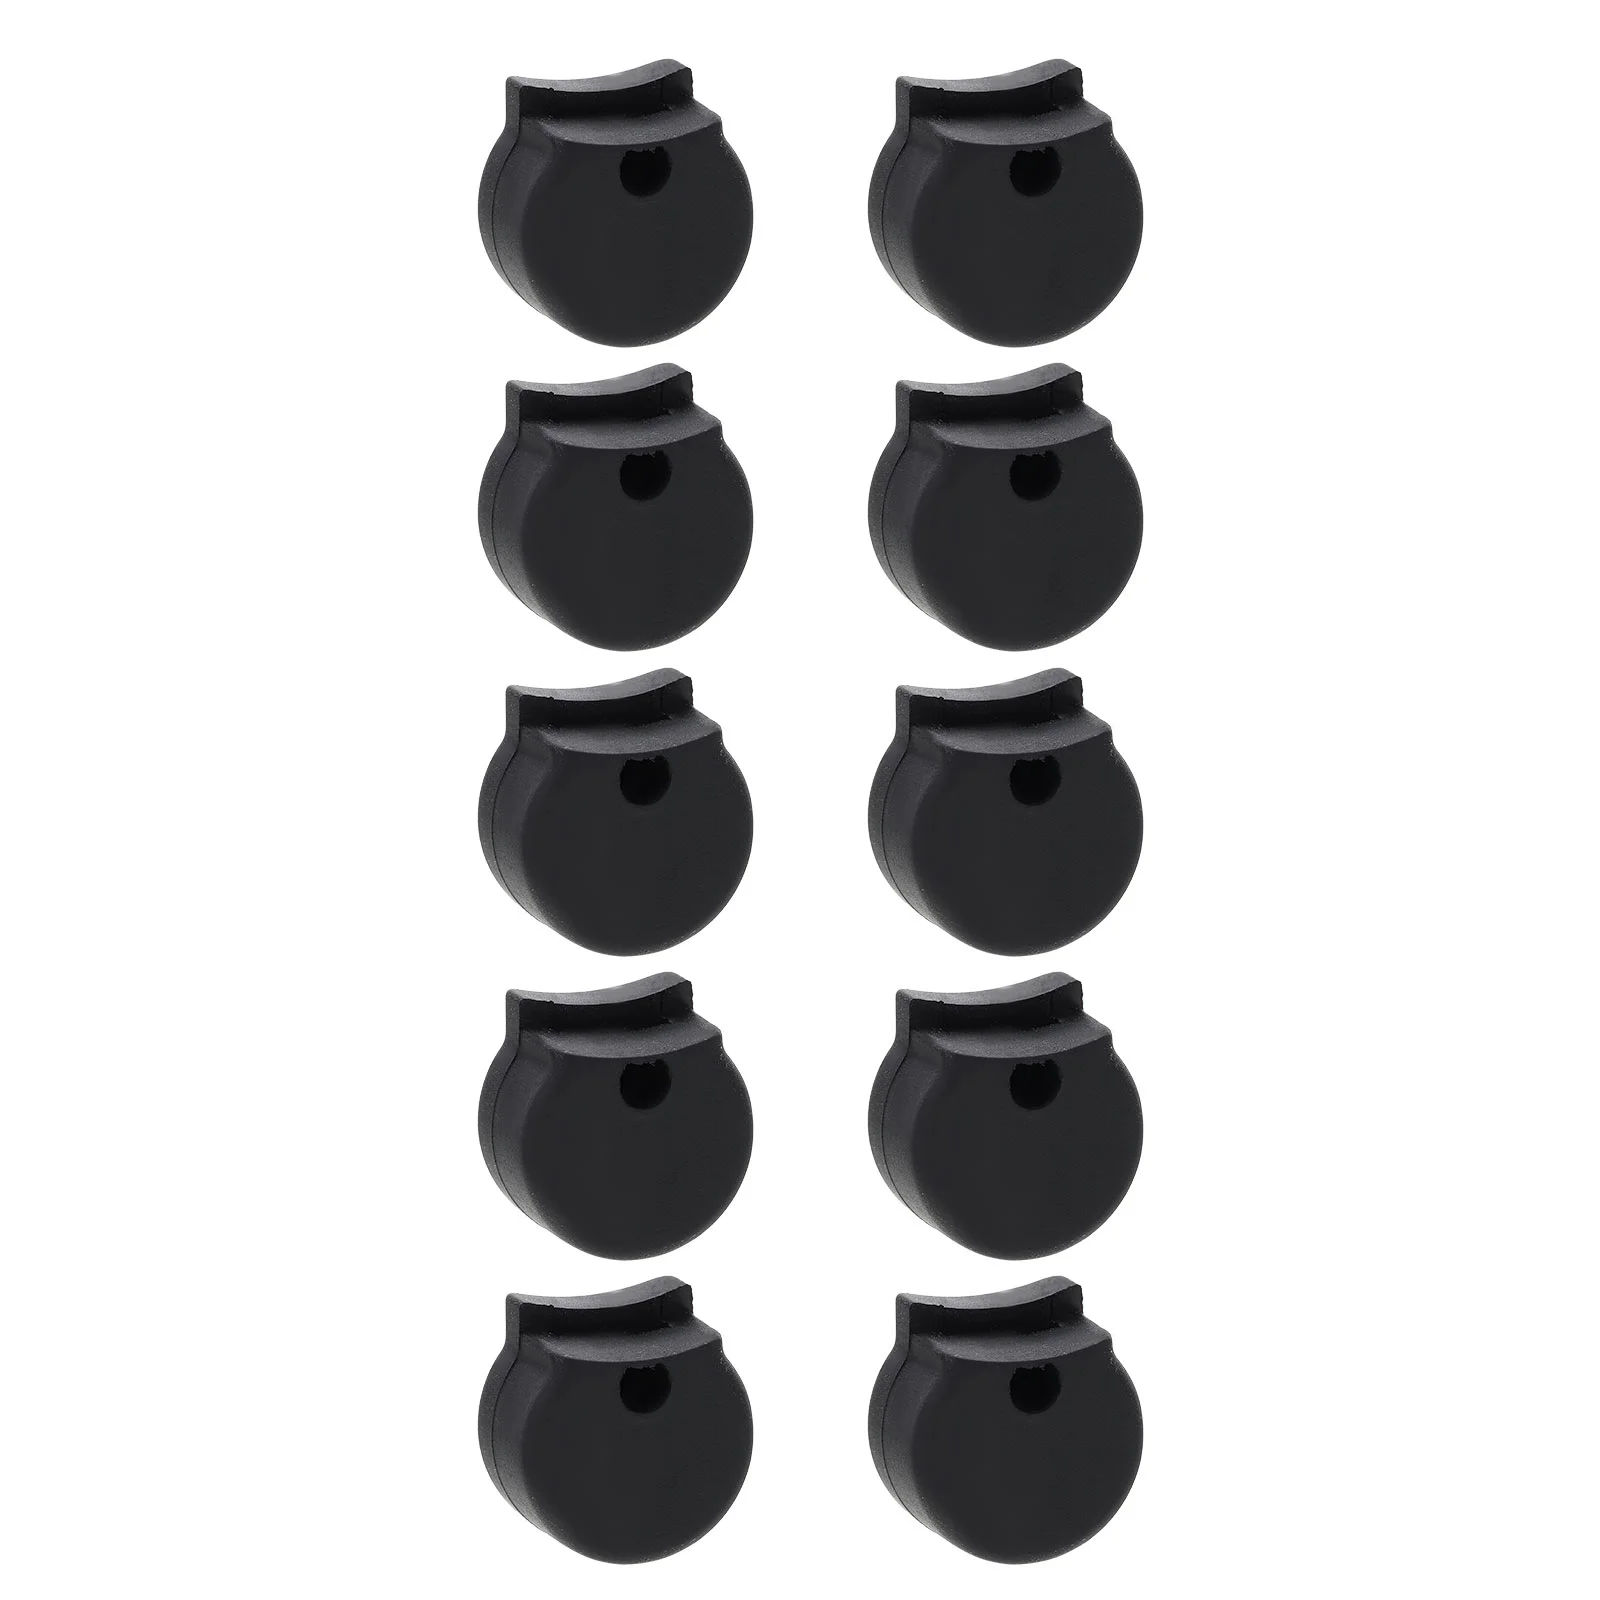 

10 Pcs Saxophone Accessories Clarinet Finger Rest Cover Thumb Comfortable Lightweight Cushion Silicone Black Oboe